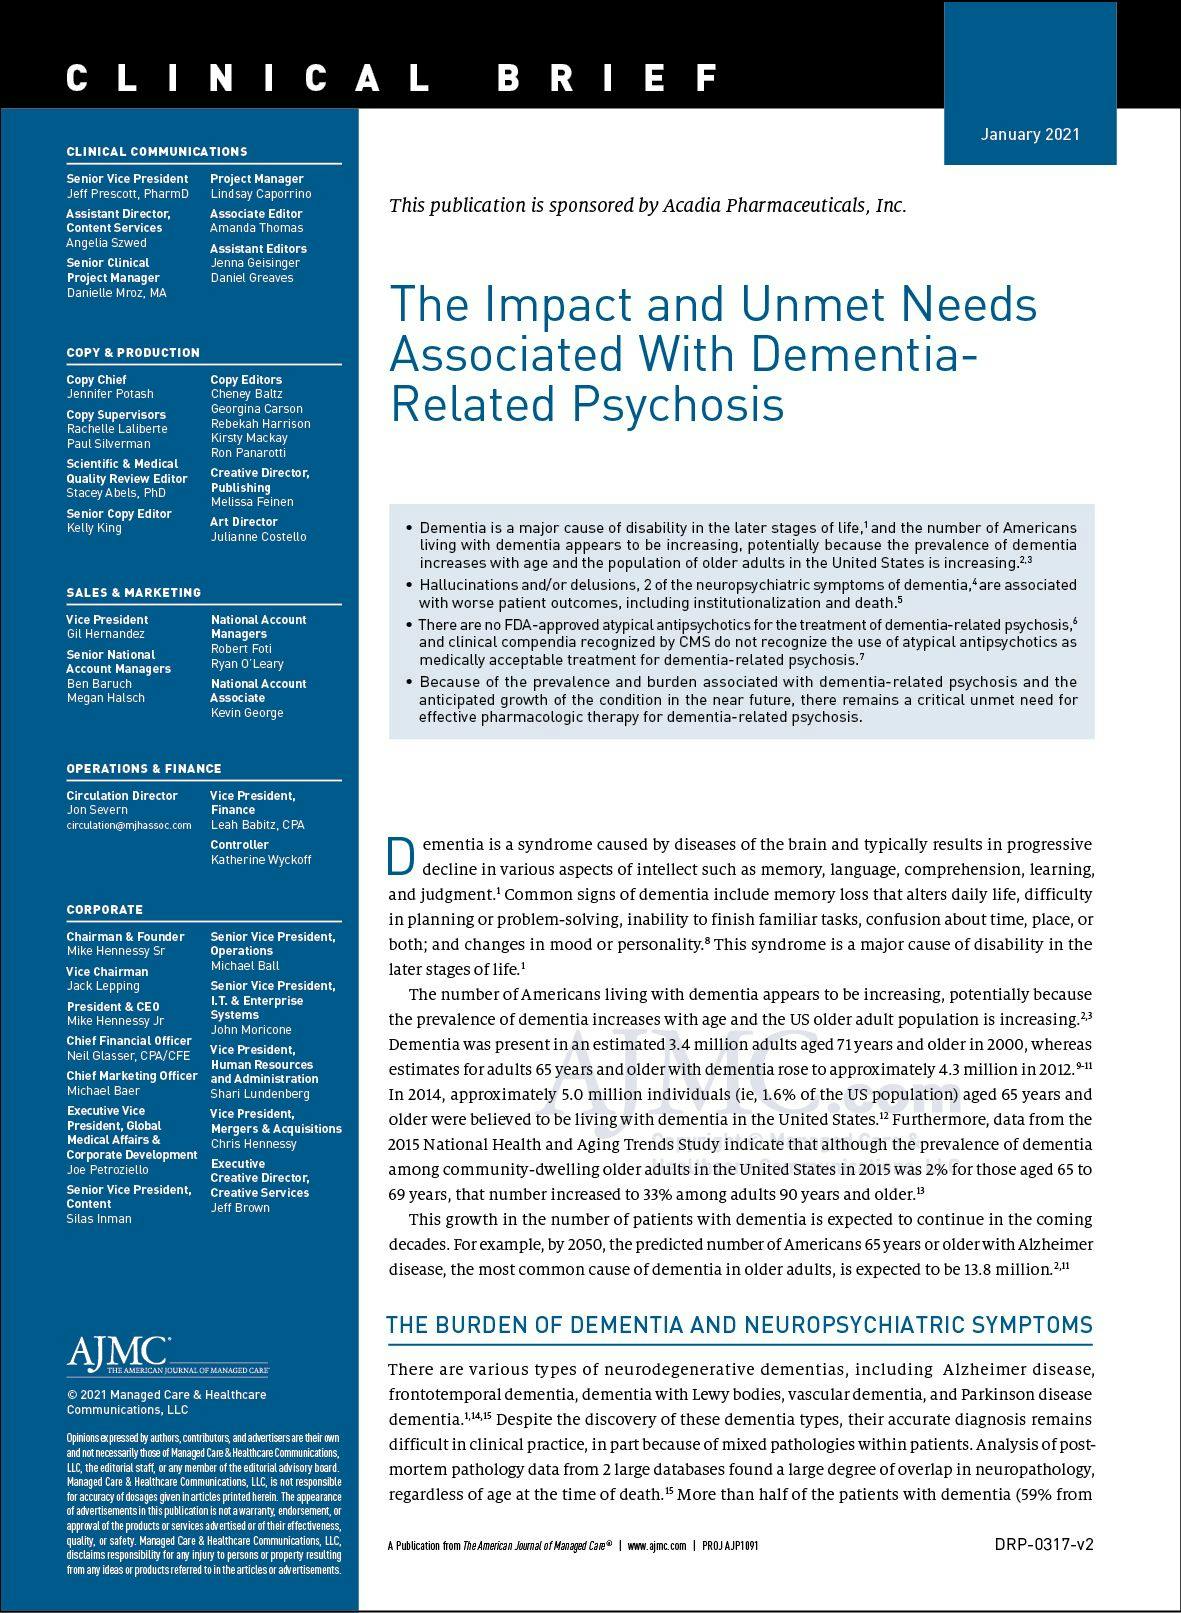 The Impact and Unmet Needs Associated With Dementia- Related Psychosis